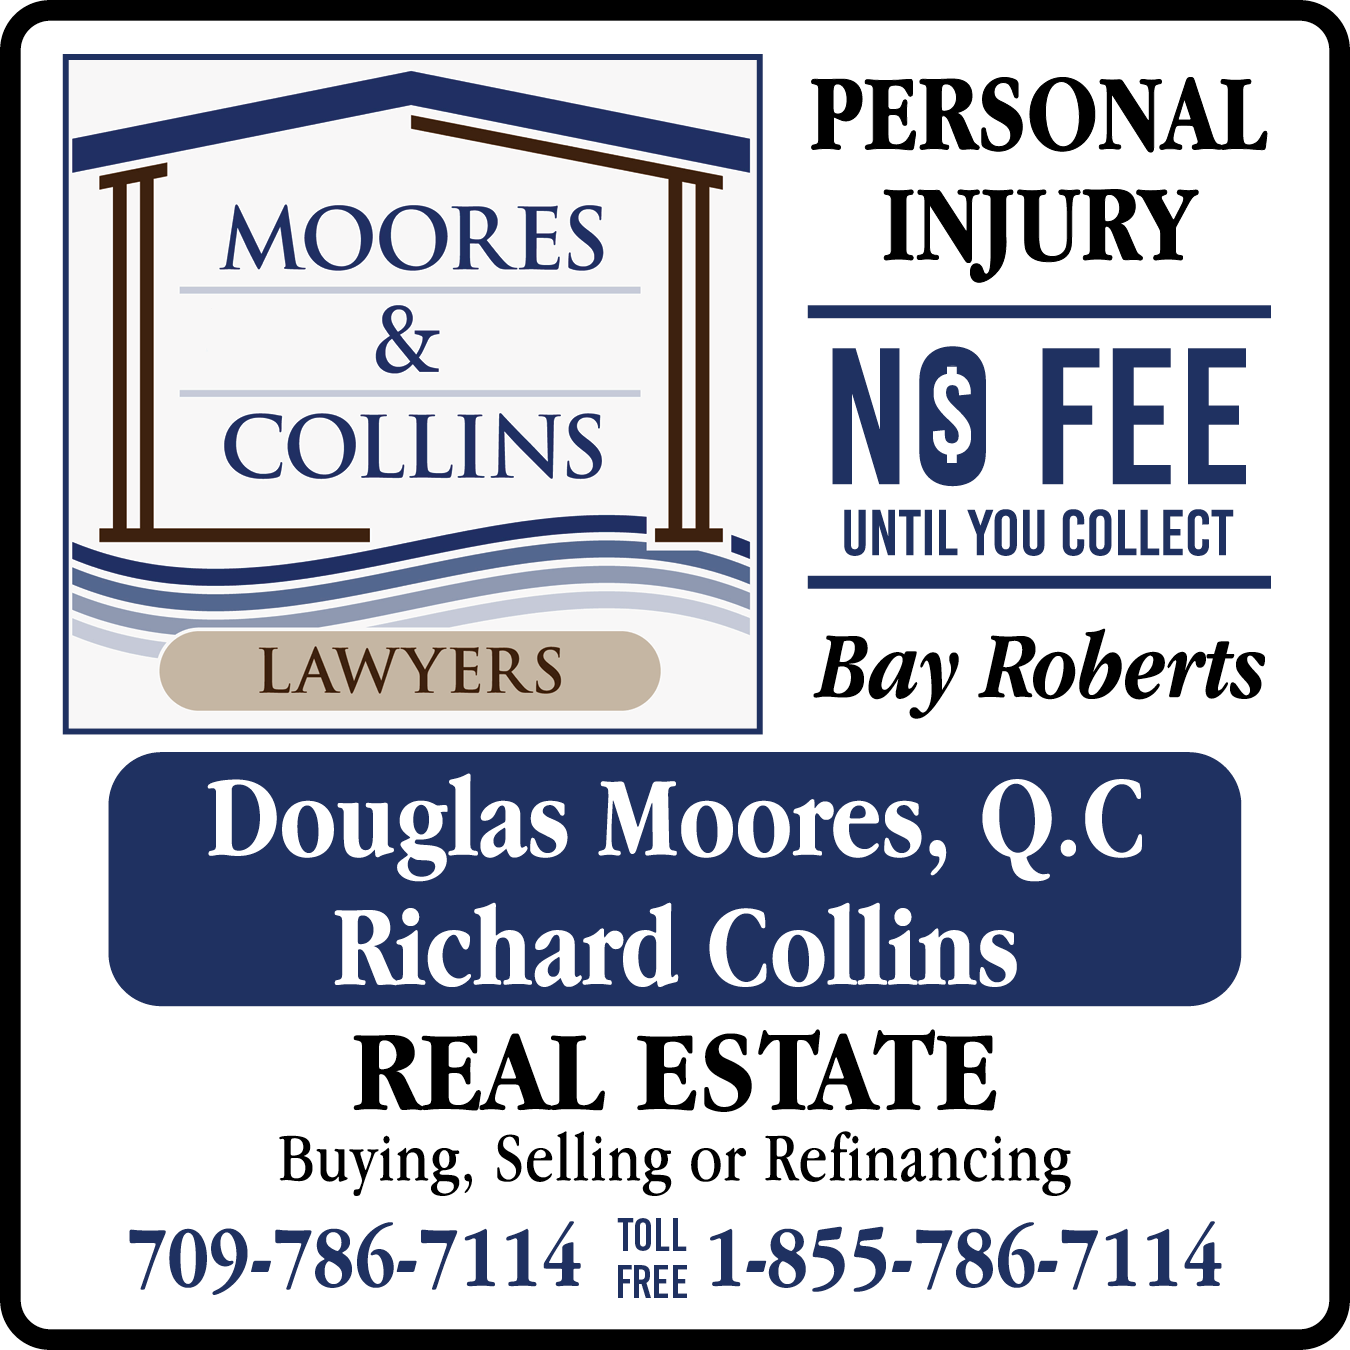 Moores & Collins Lawyers